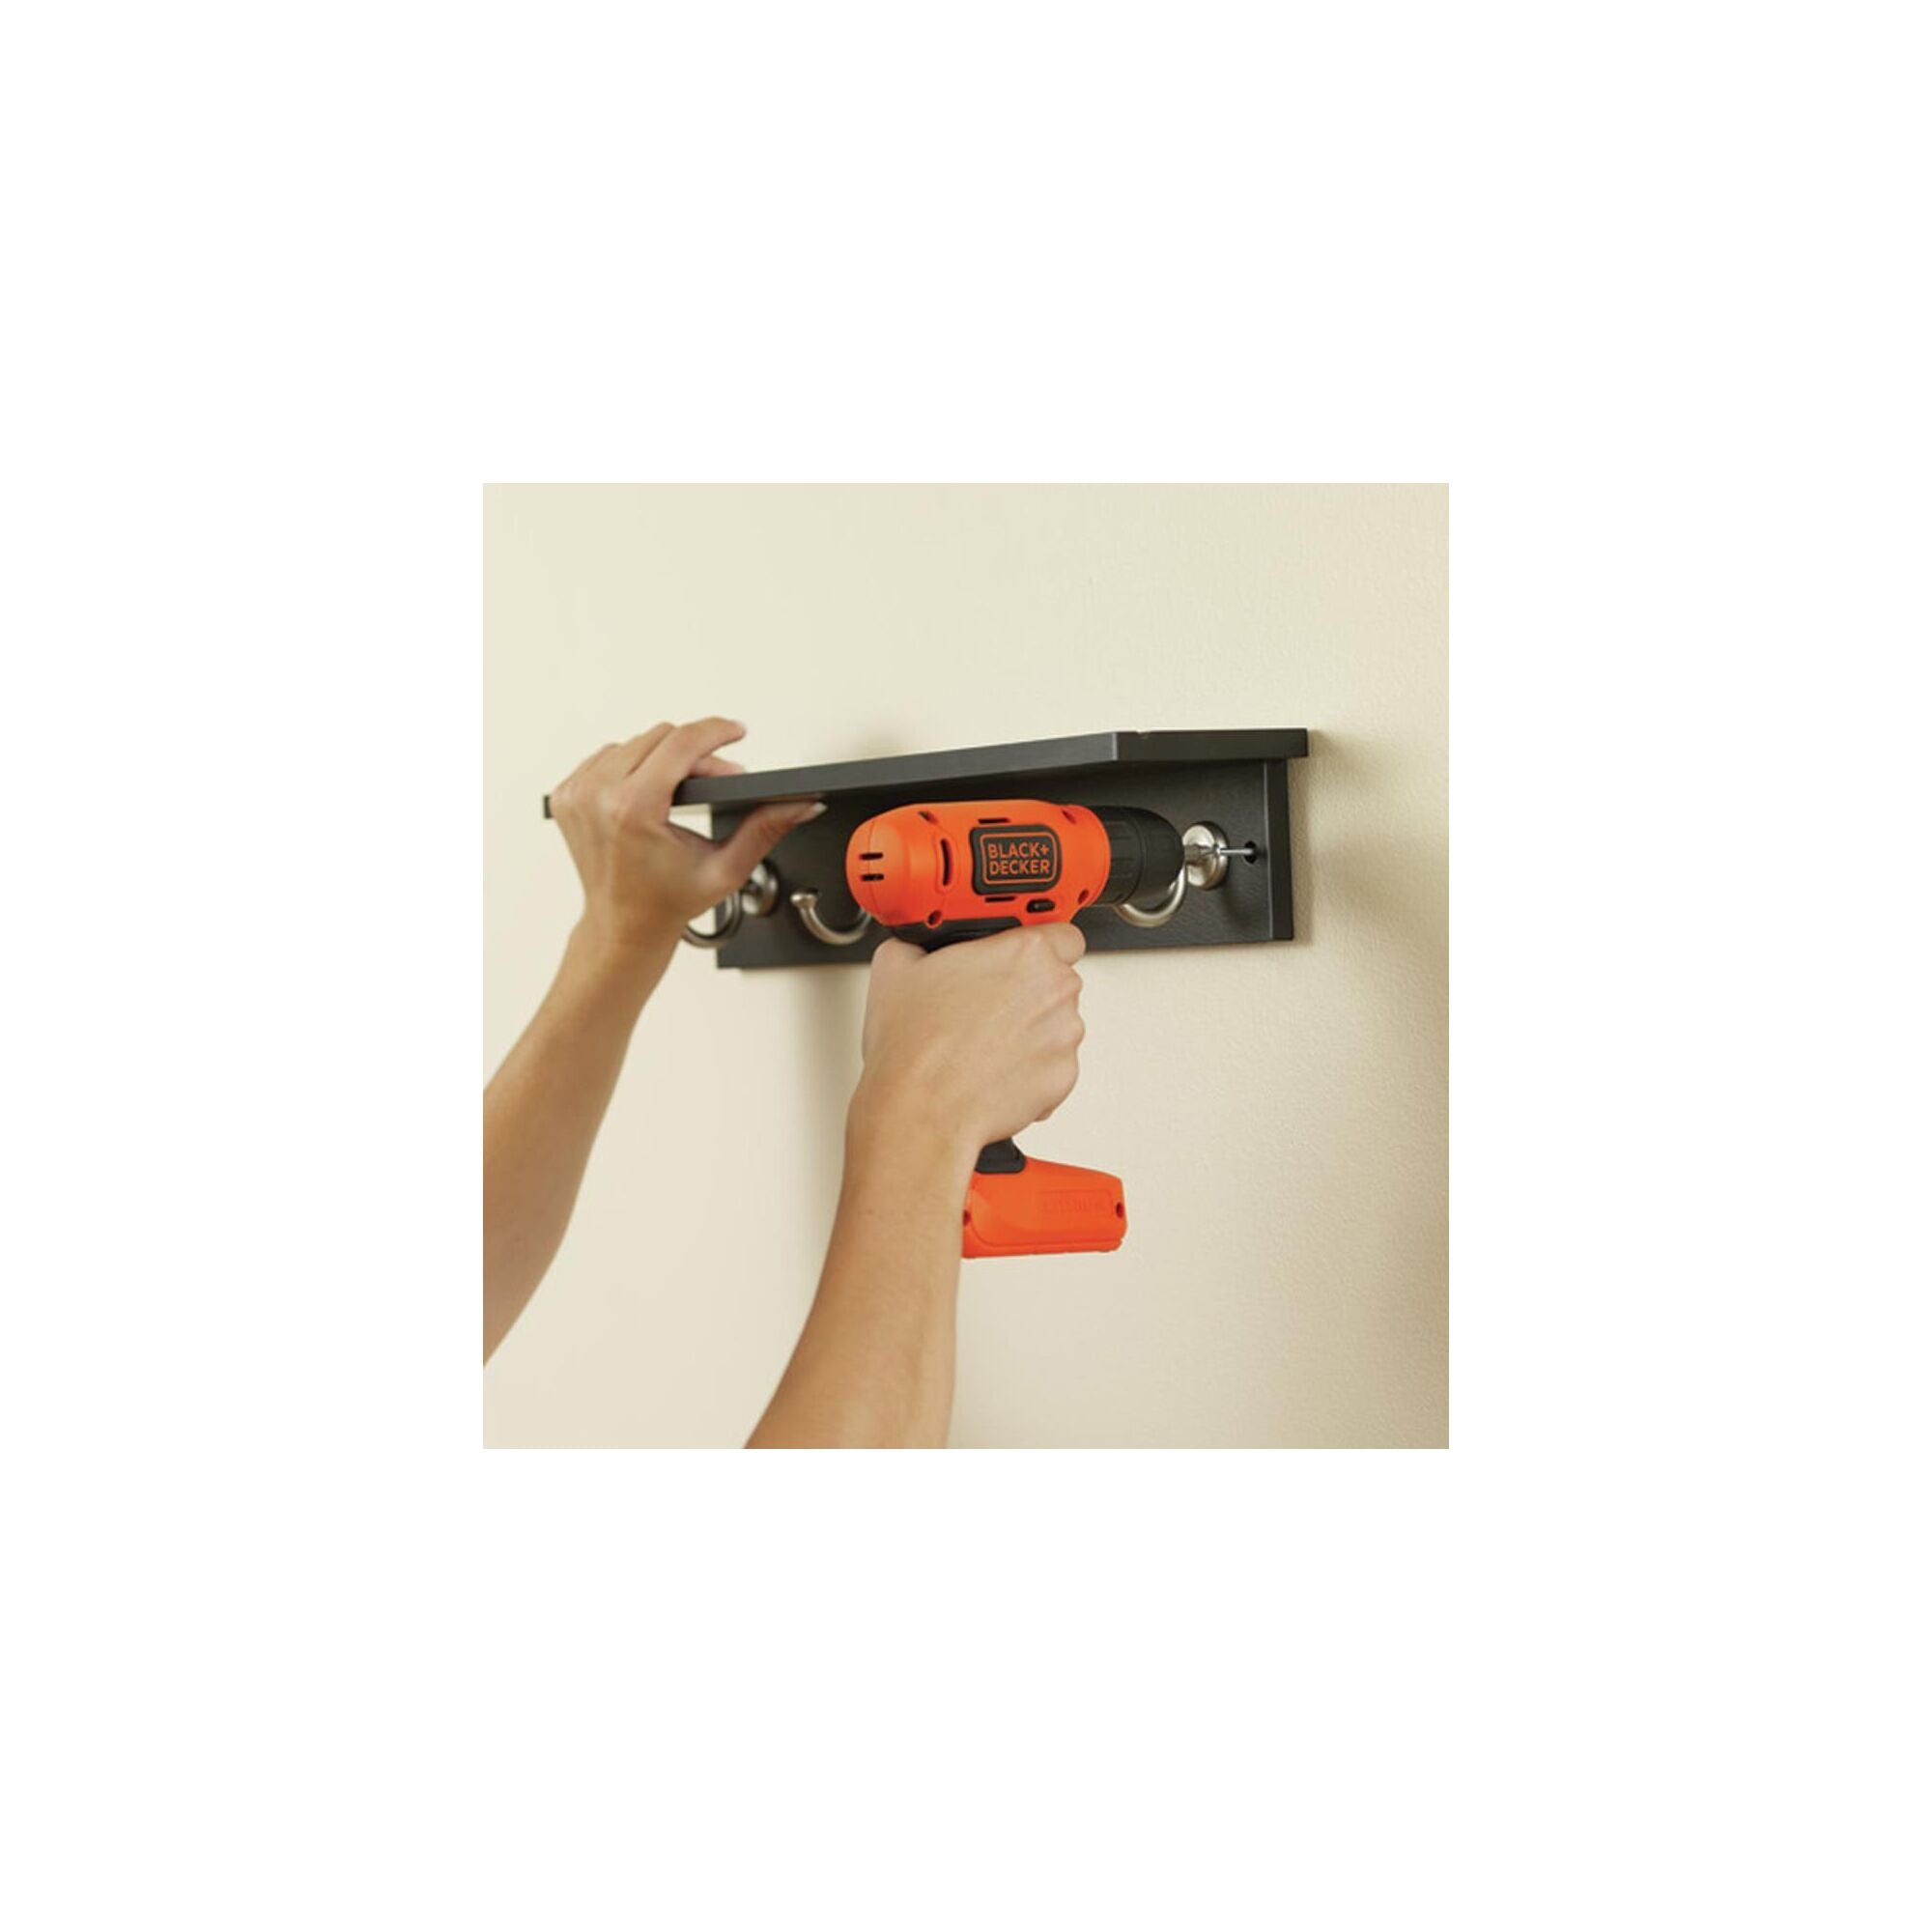 Person using Cordless Lithium Drill to put wall hooks with ease.